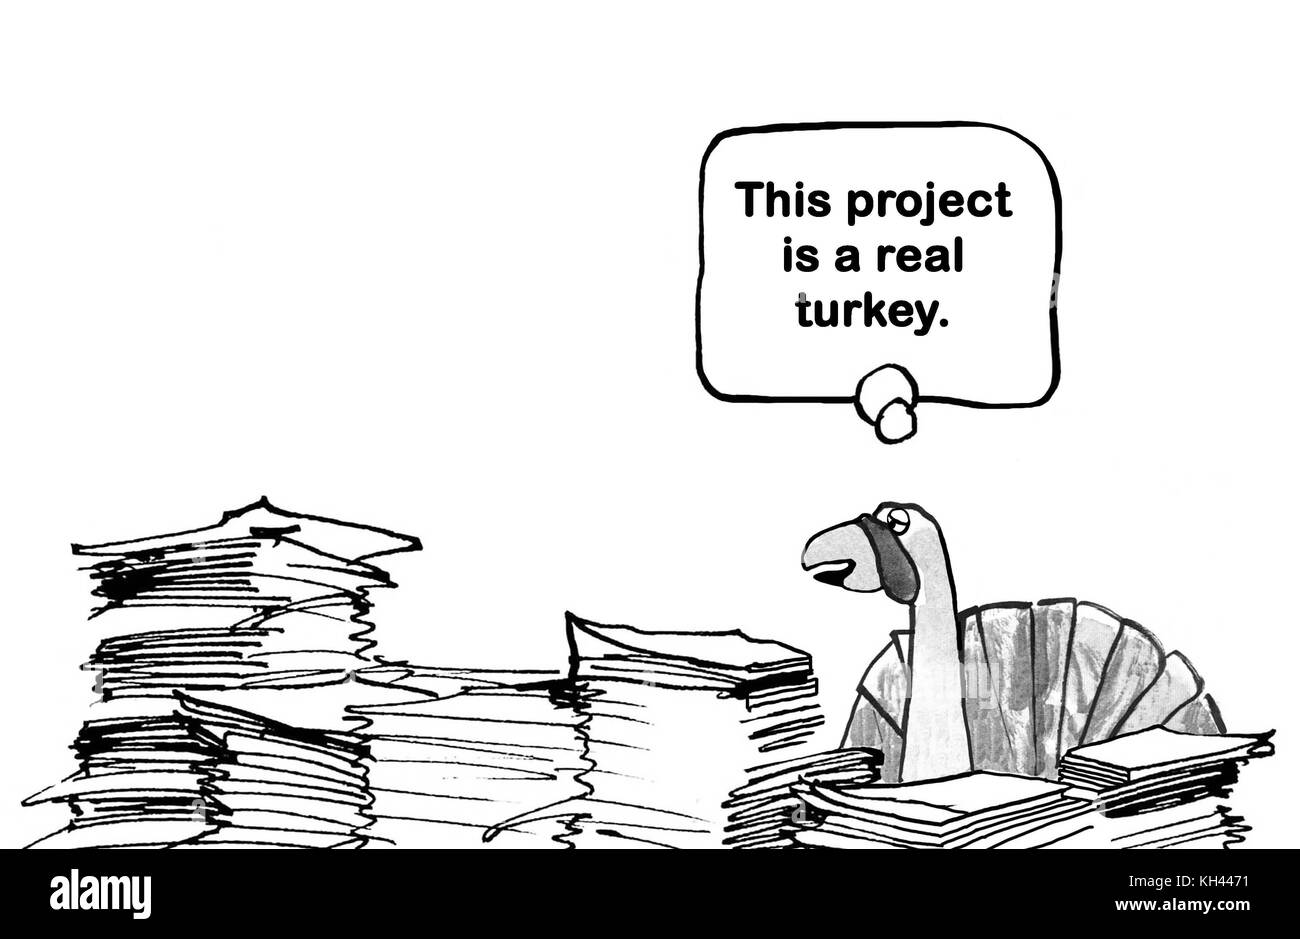 Business cartoon of a turkey saying the project he is working on 'is a real turkey'. Stock Photo